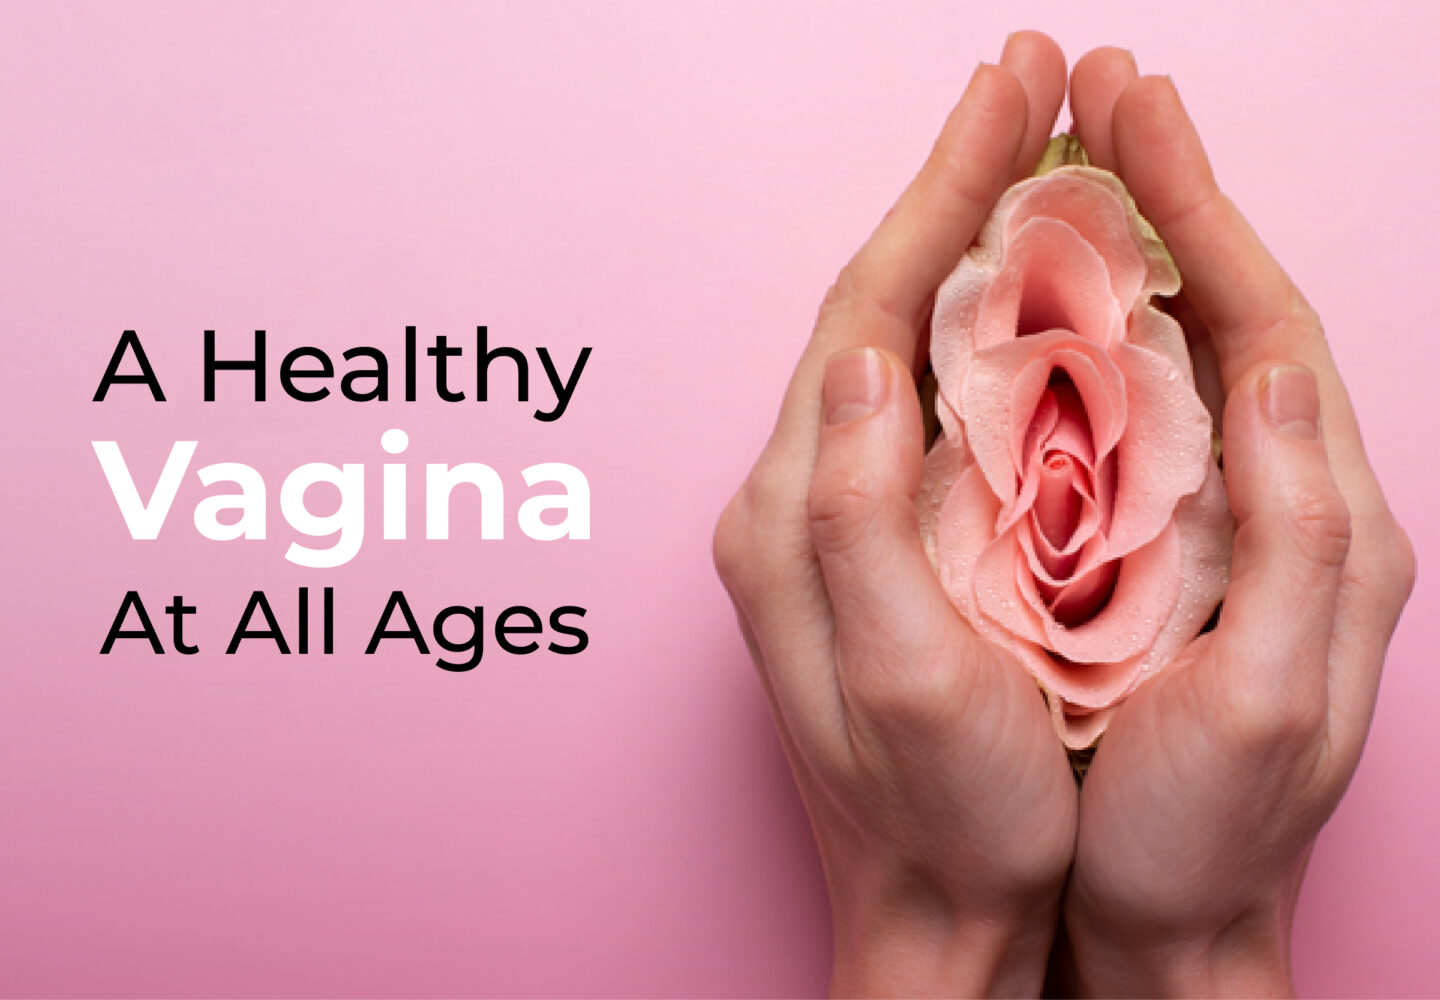 A Healthy Vagina At All Ages